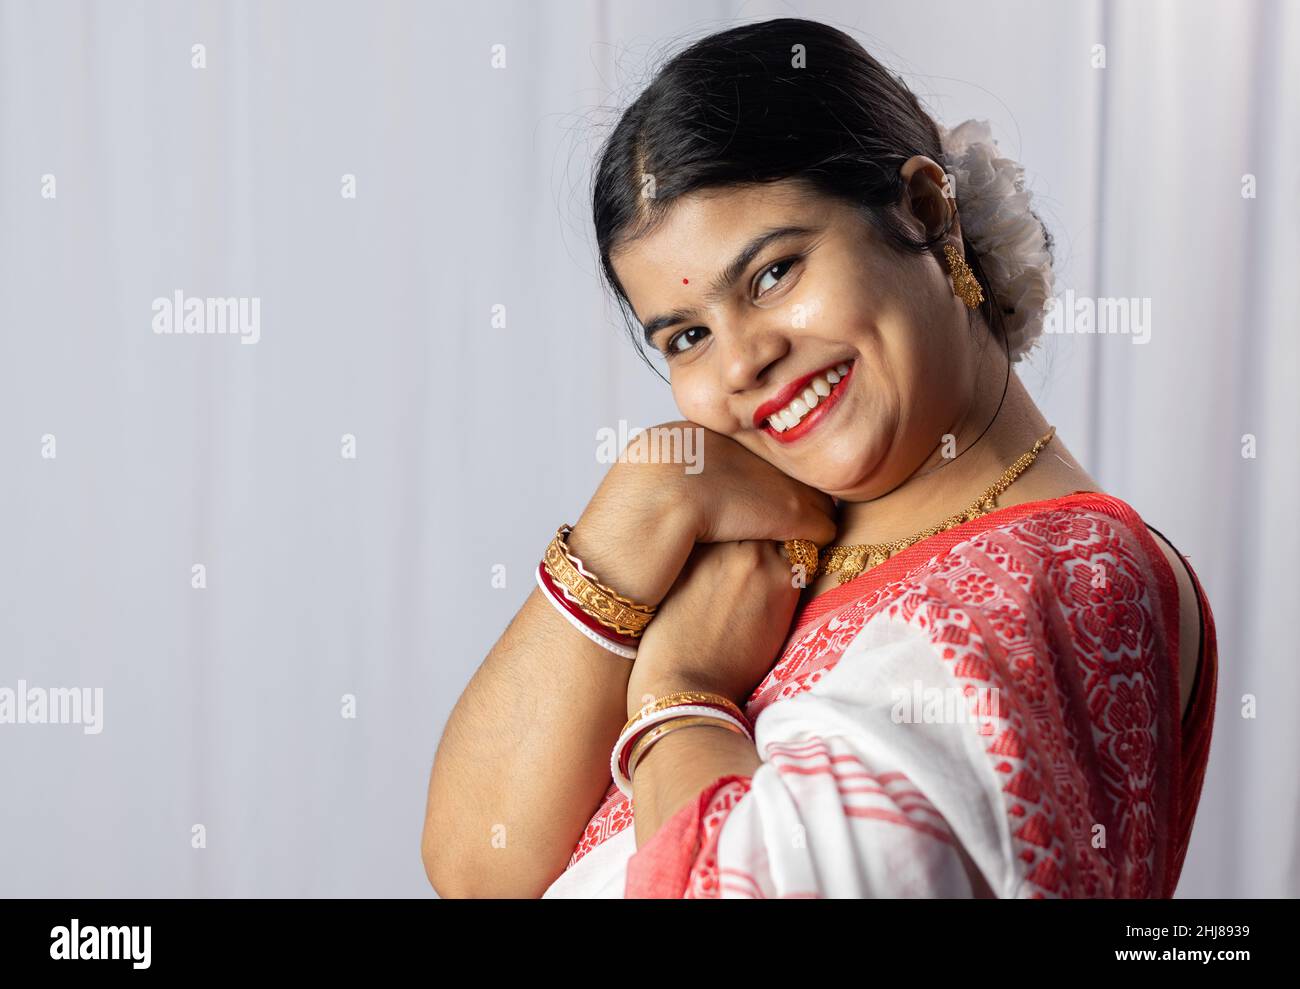 An Indian woman in red saree wearing bangles with smiling face on white background Stock Photo